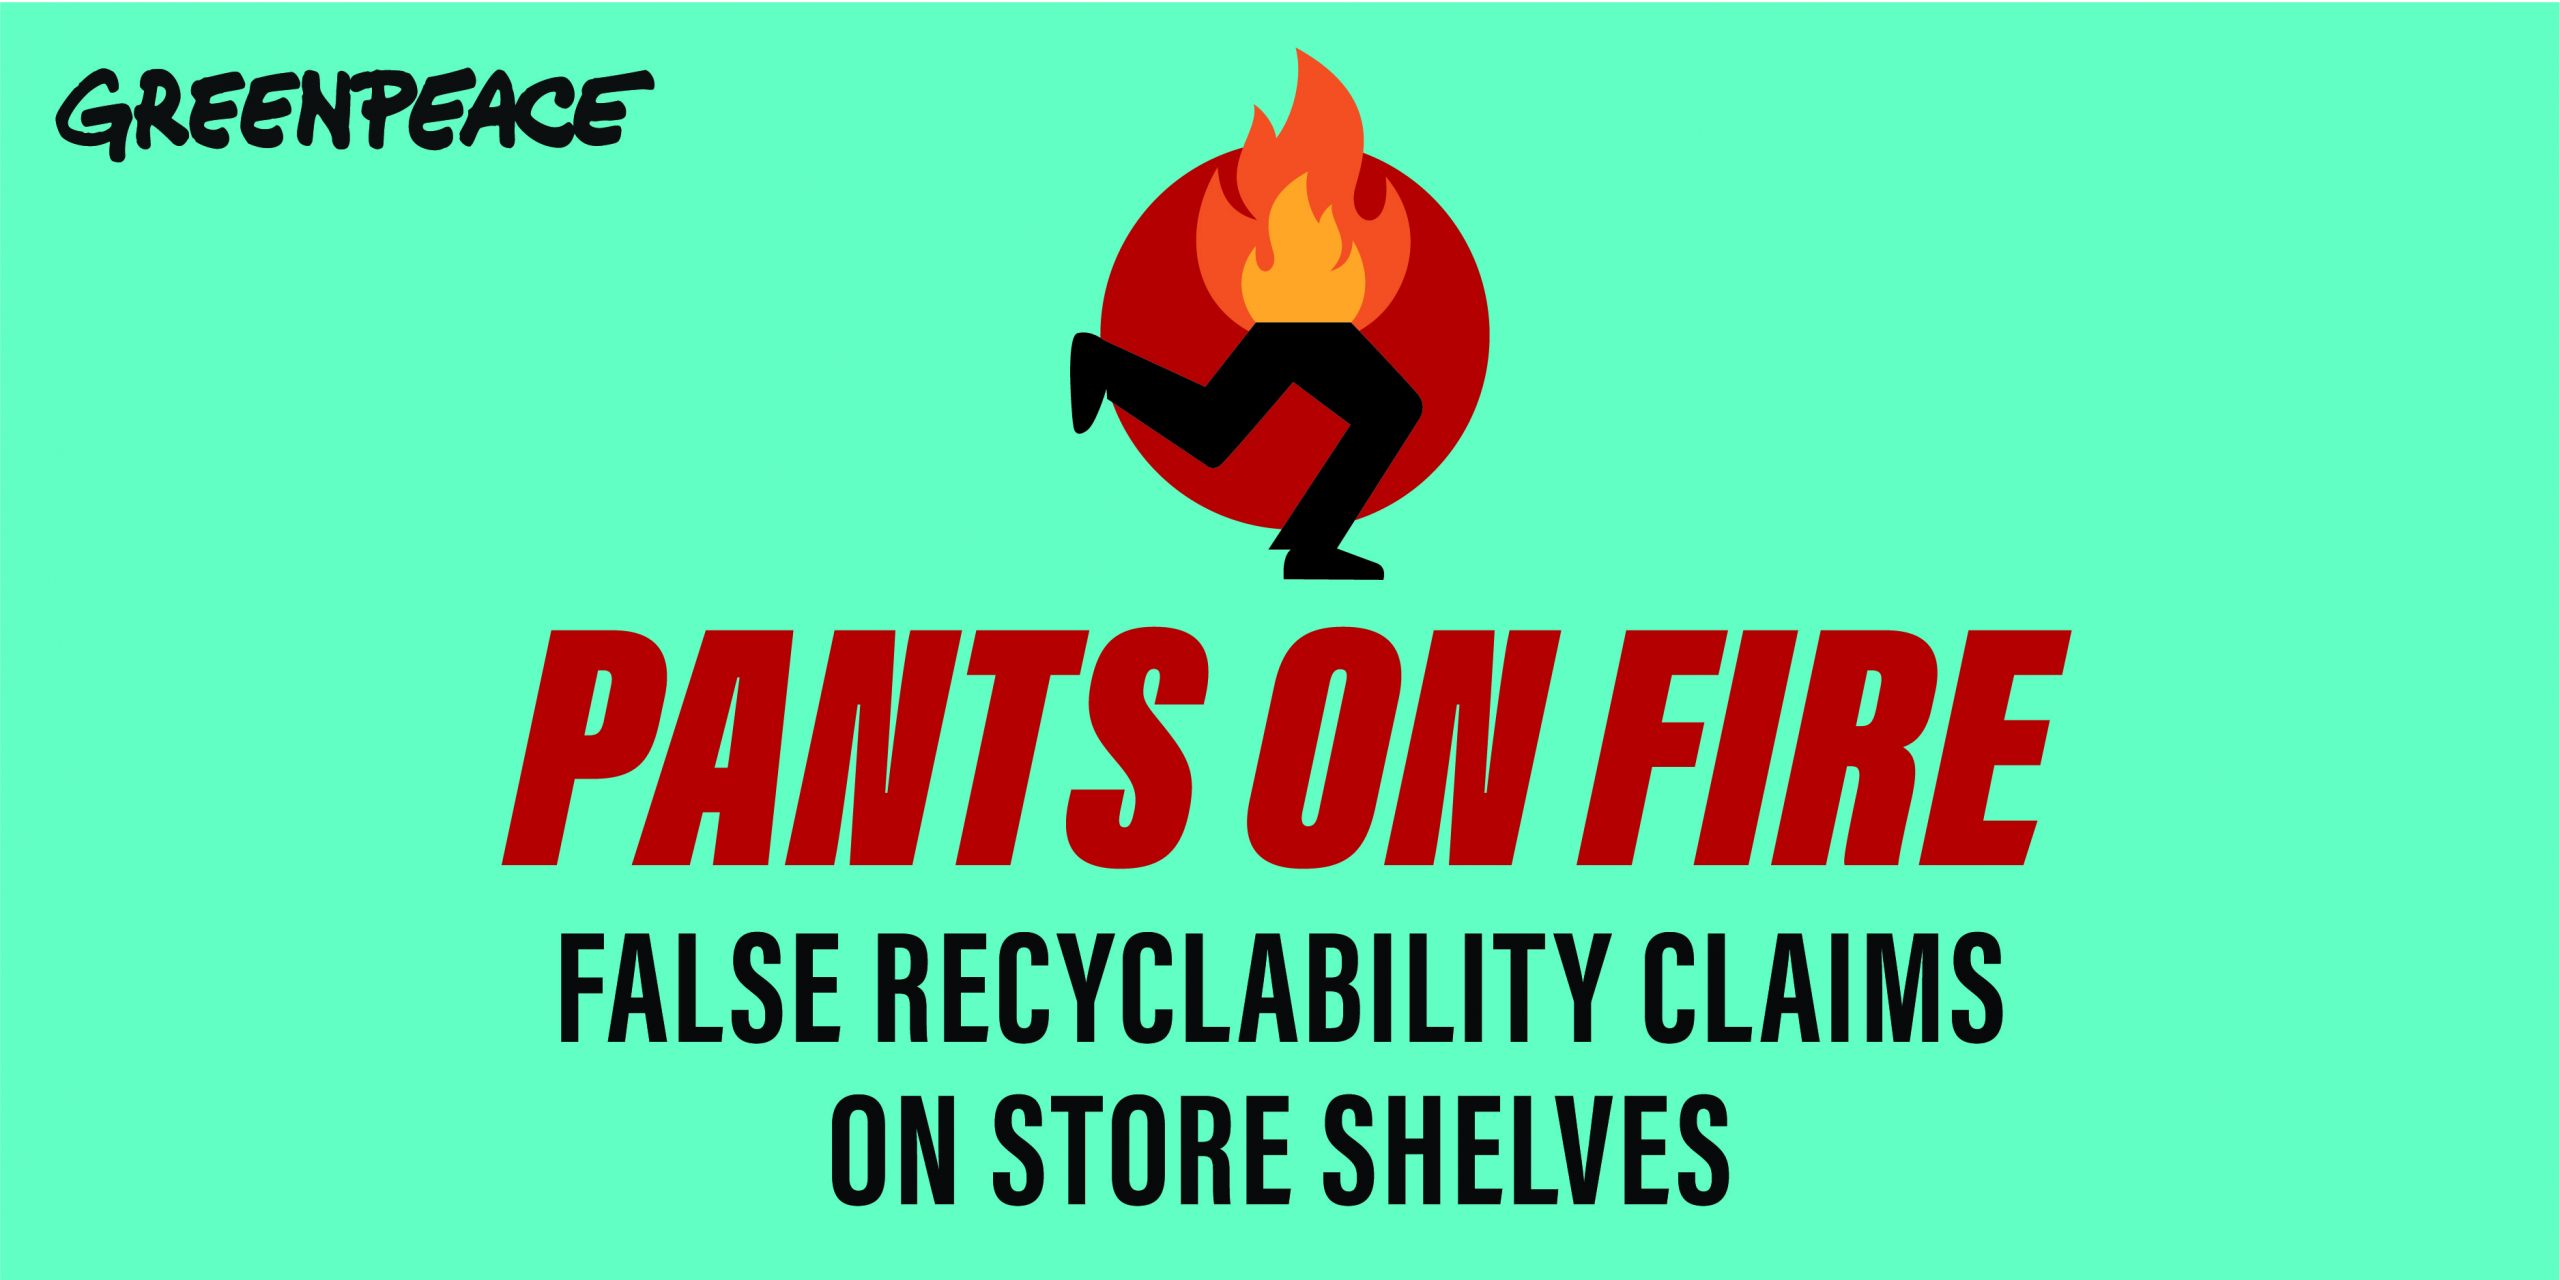 Pants of fire: false recyclability claims